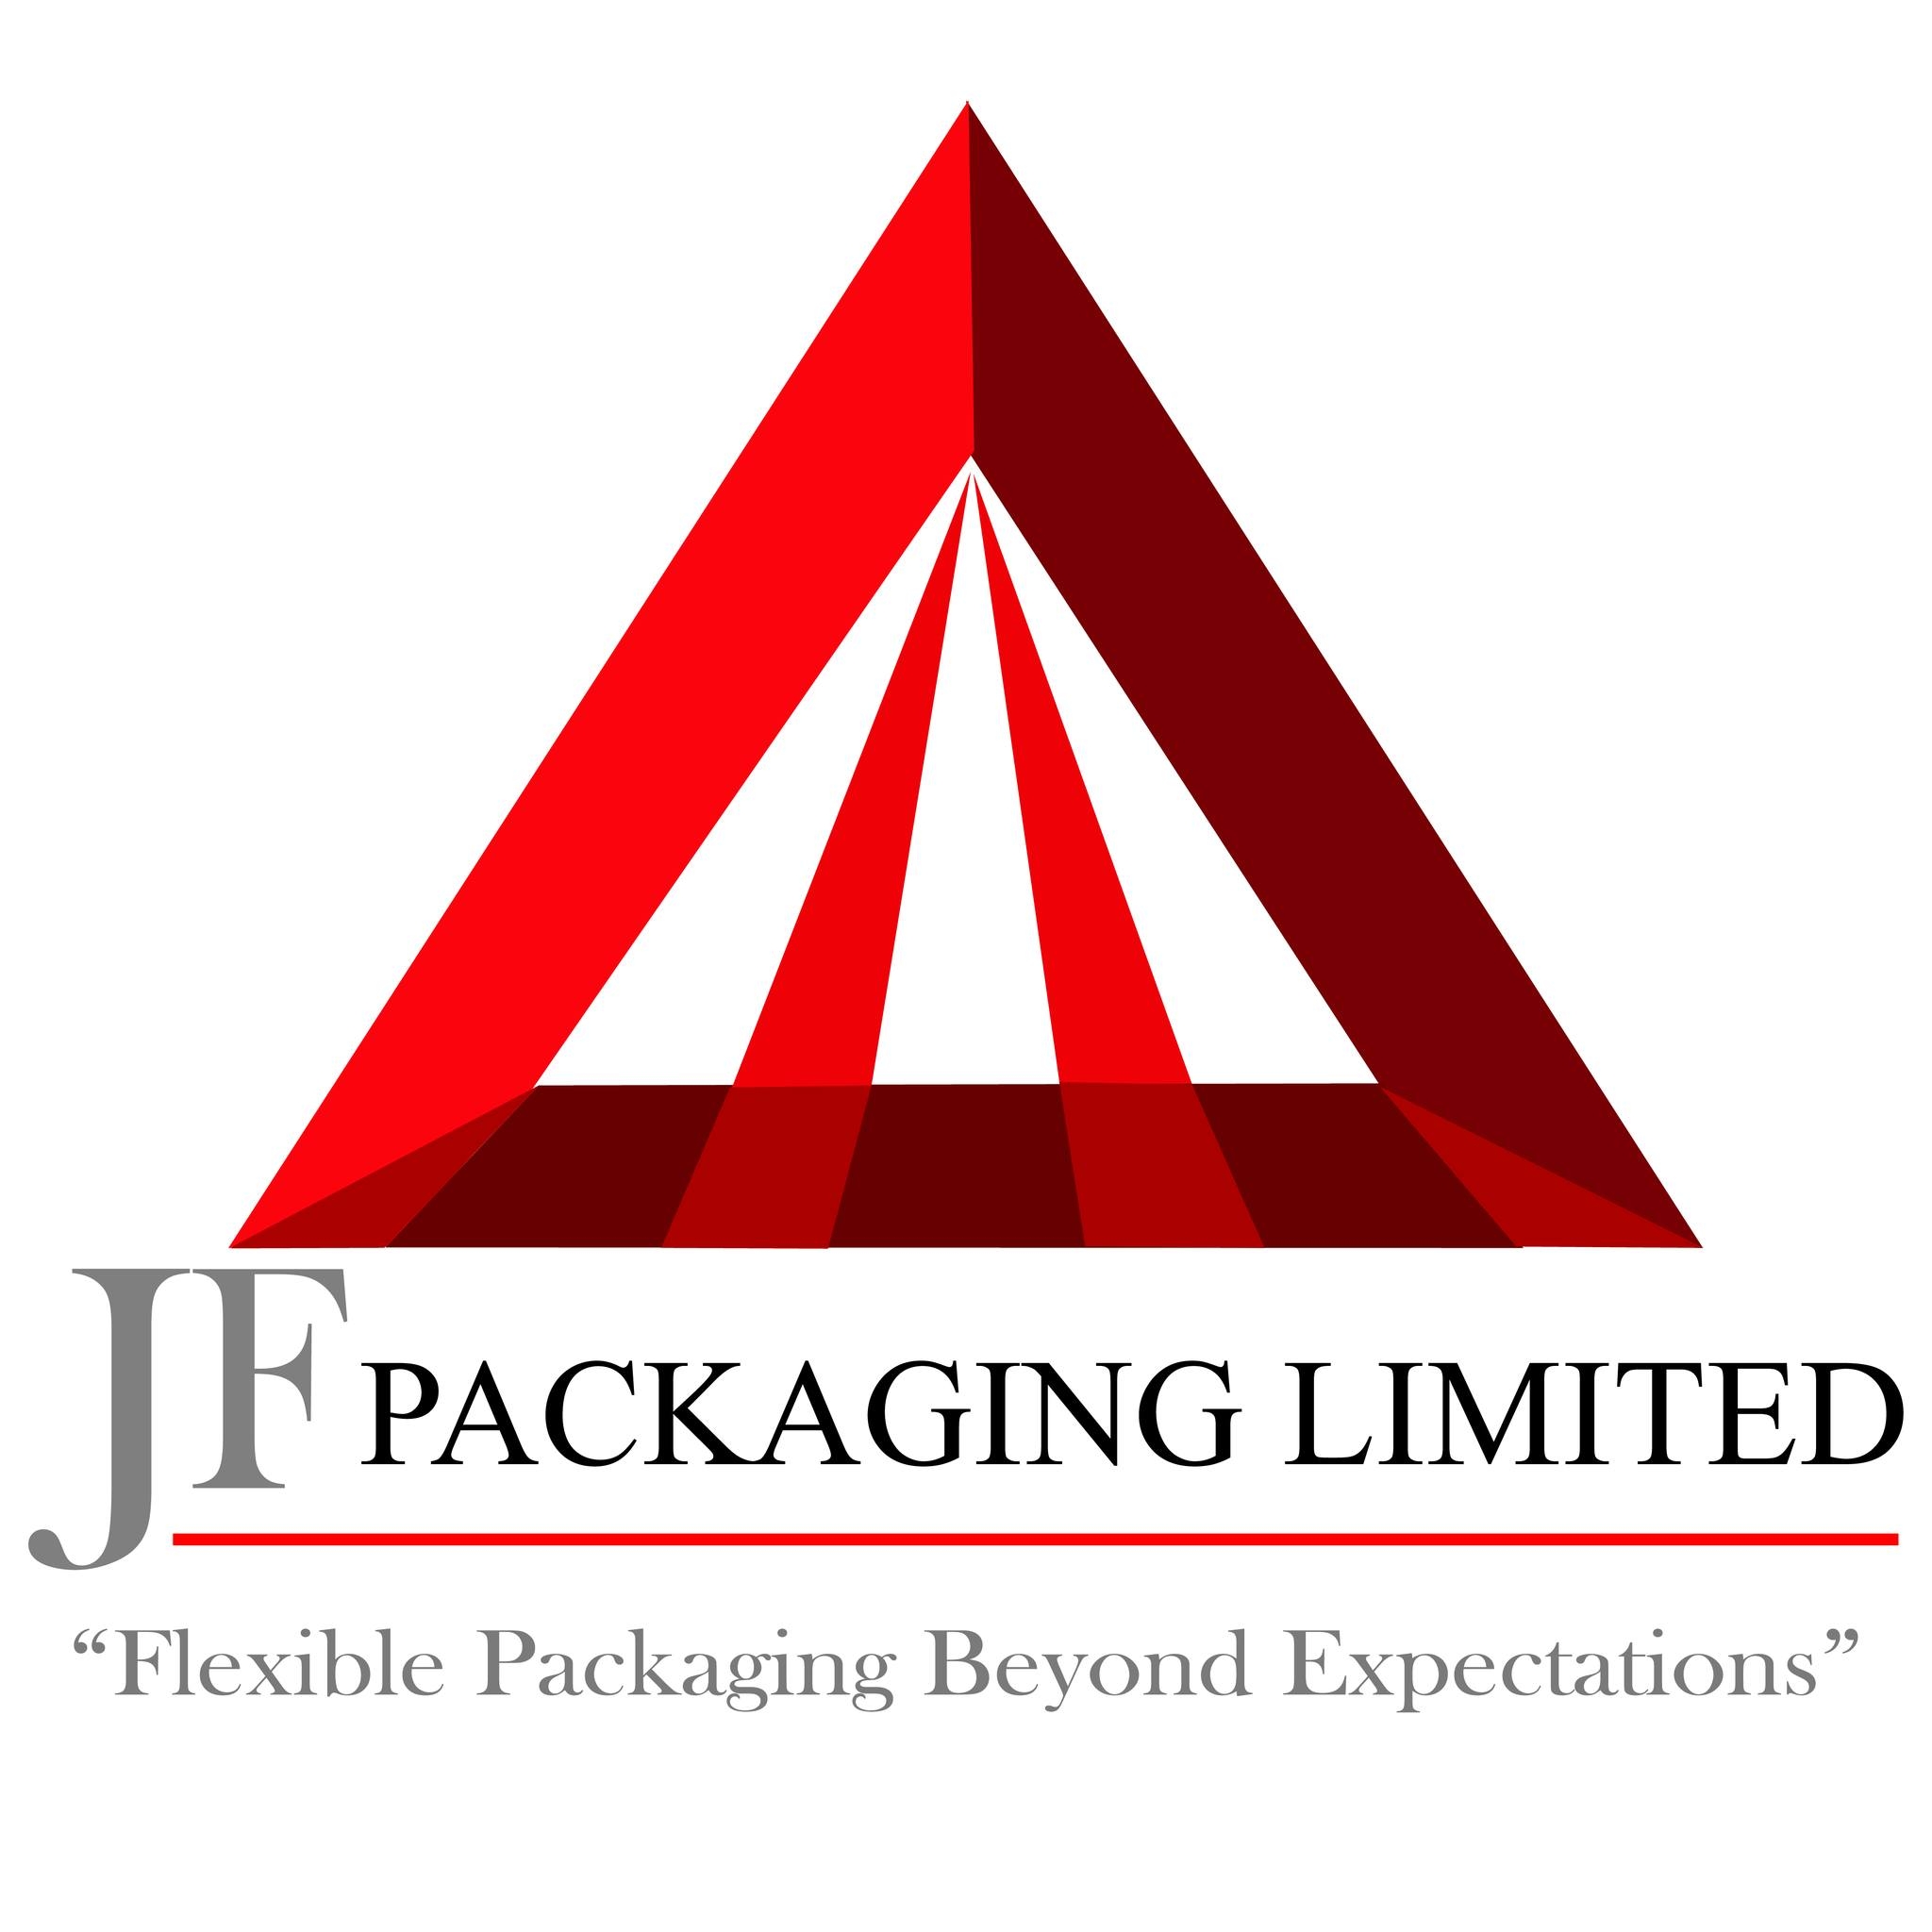 J. F. Packaging Limited